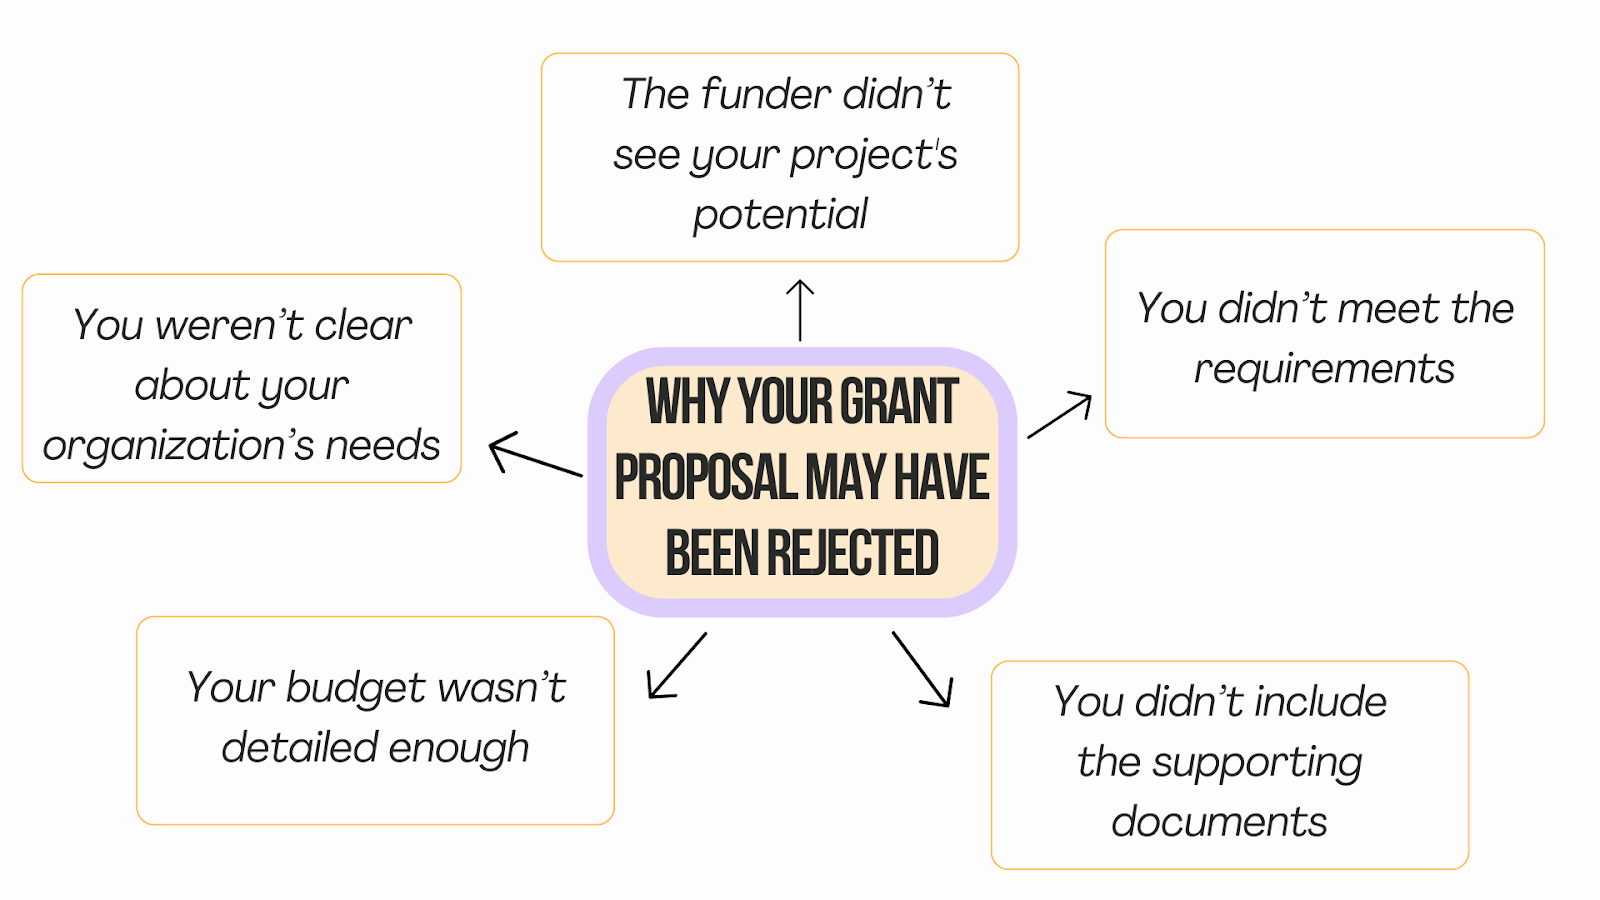 Prospero - reasons why your grant proposal may have been rejected